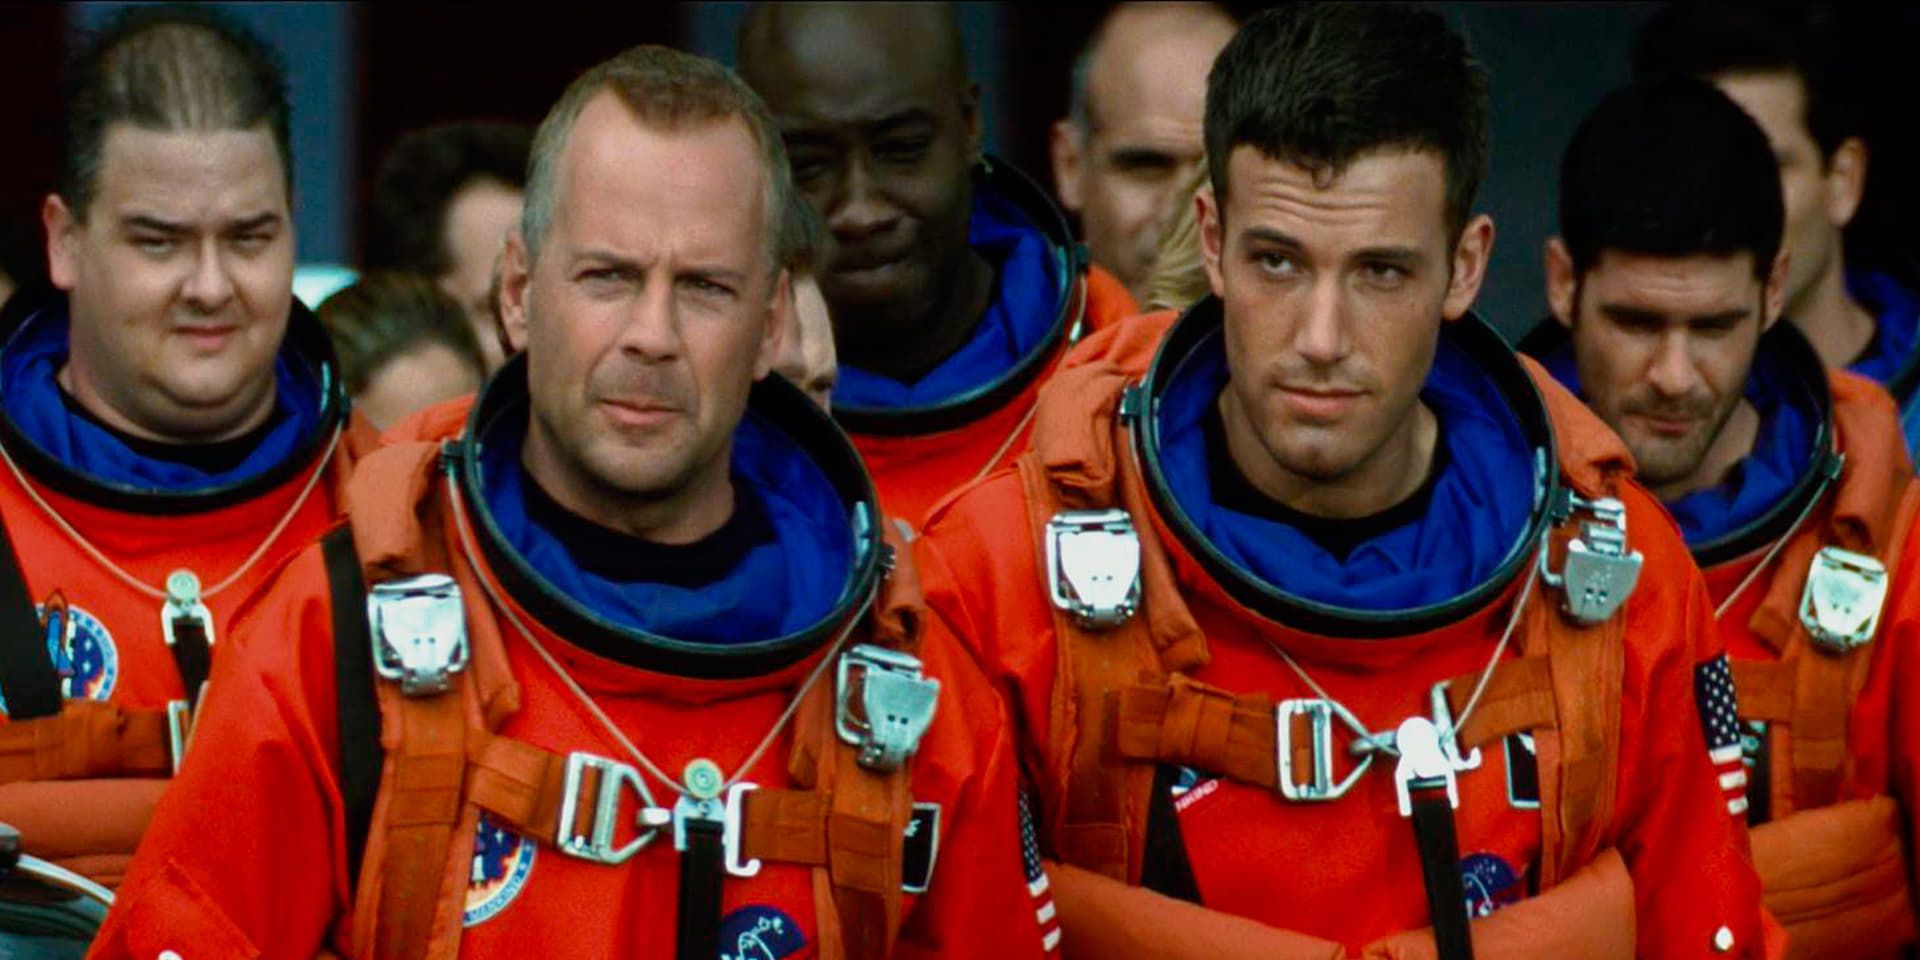 Bruce Willis and Ben Affleck with other drillers turned astronauts in Armageddon